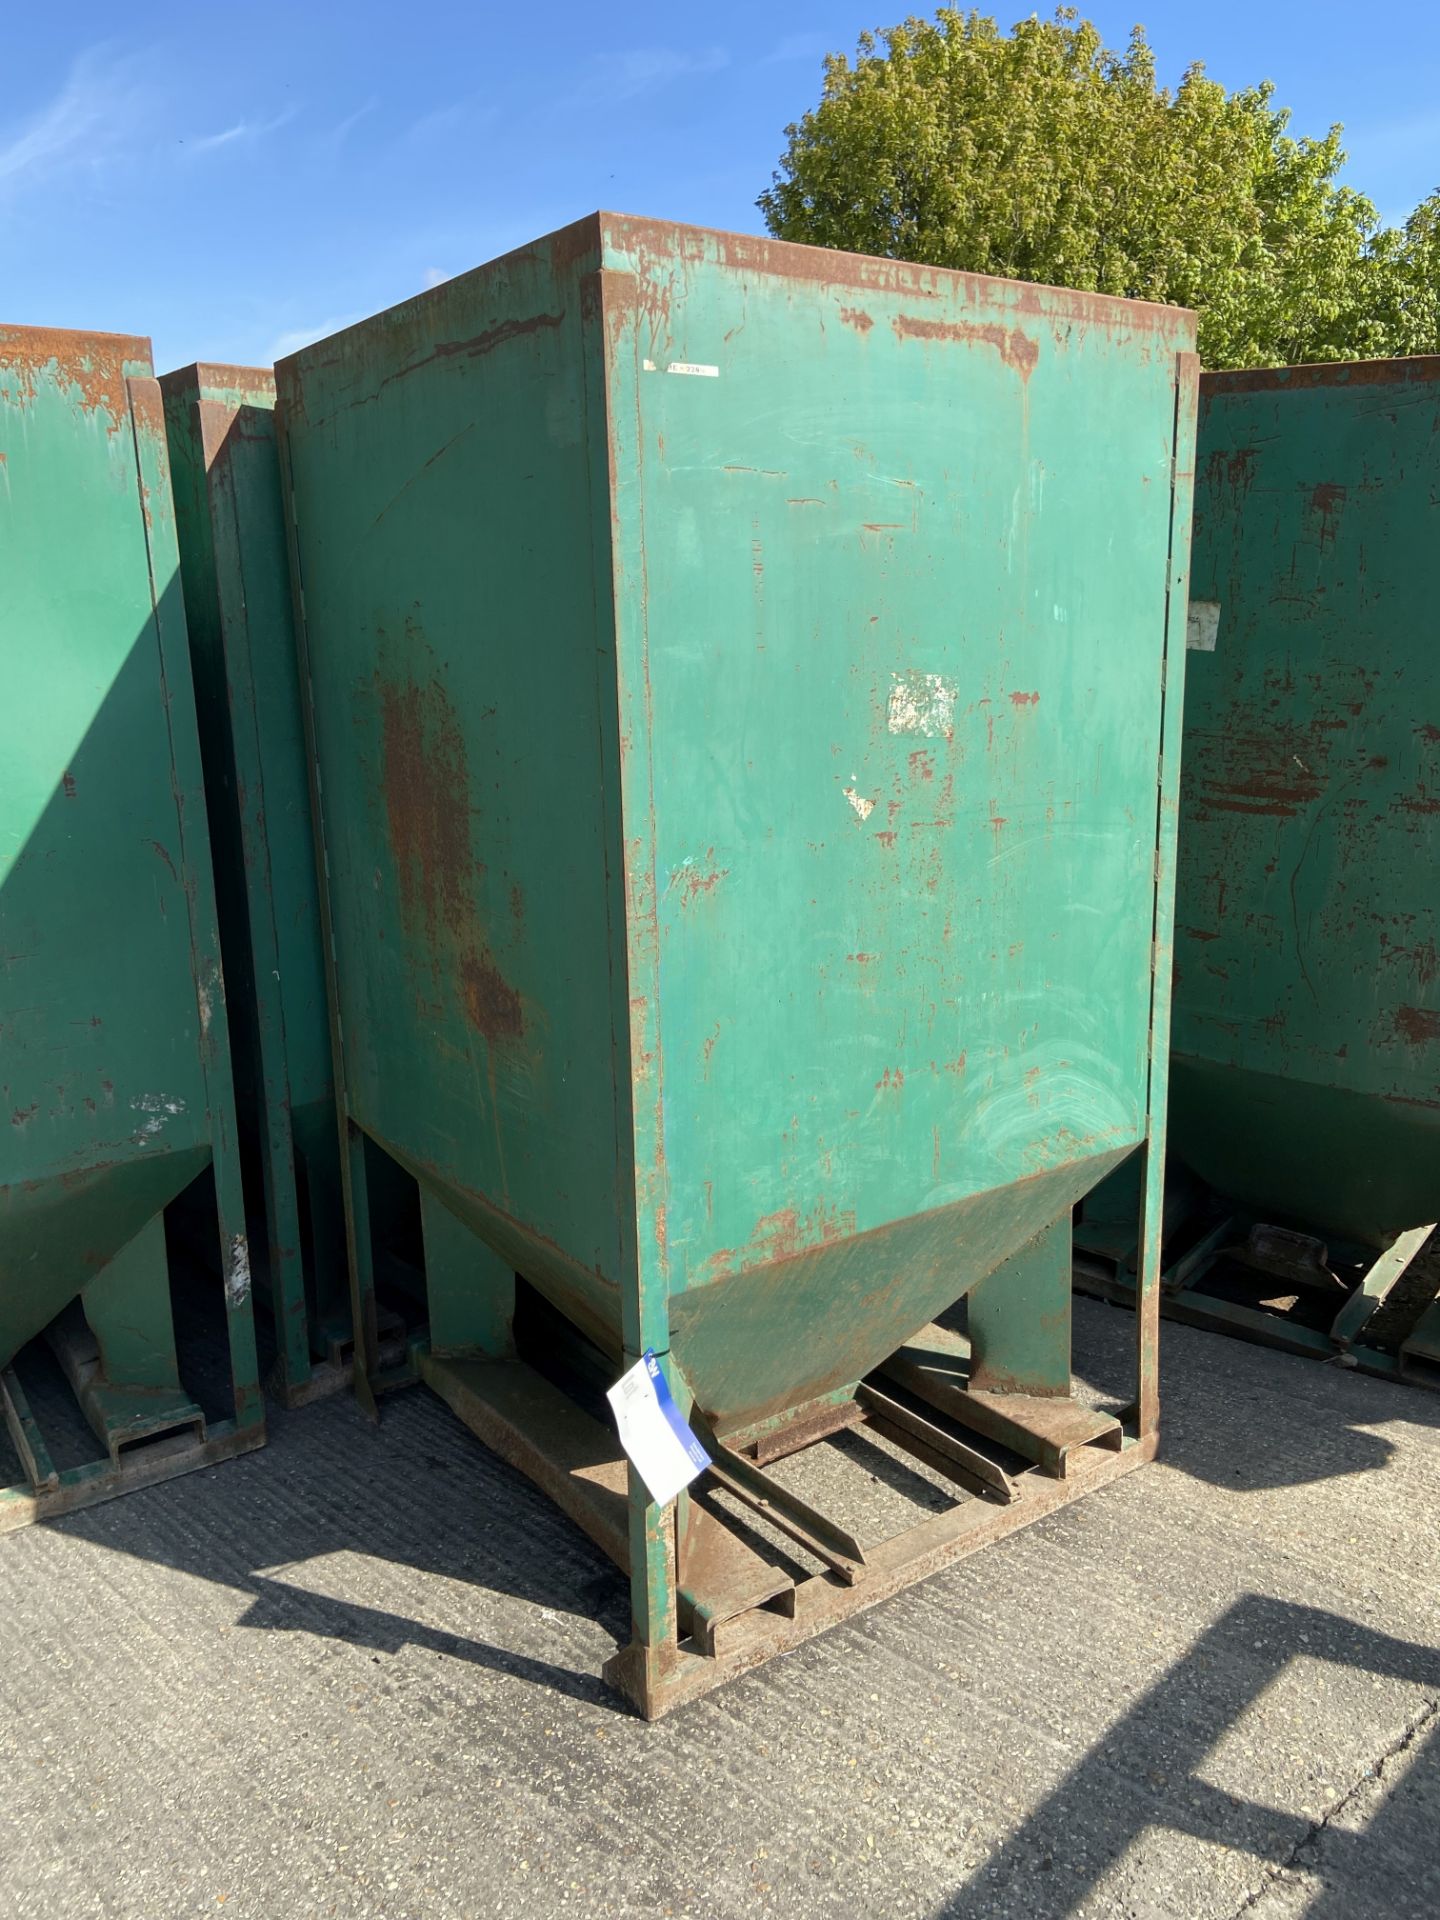 FIVE HOPPER BOTTOMED TOTE BINS,lot located Driby Top, Alford; free loading – yes Please read the